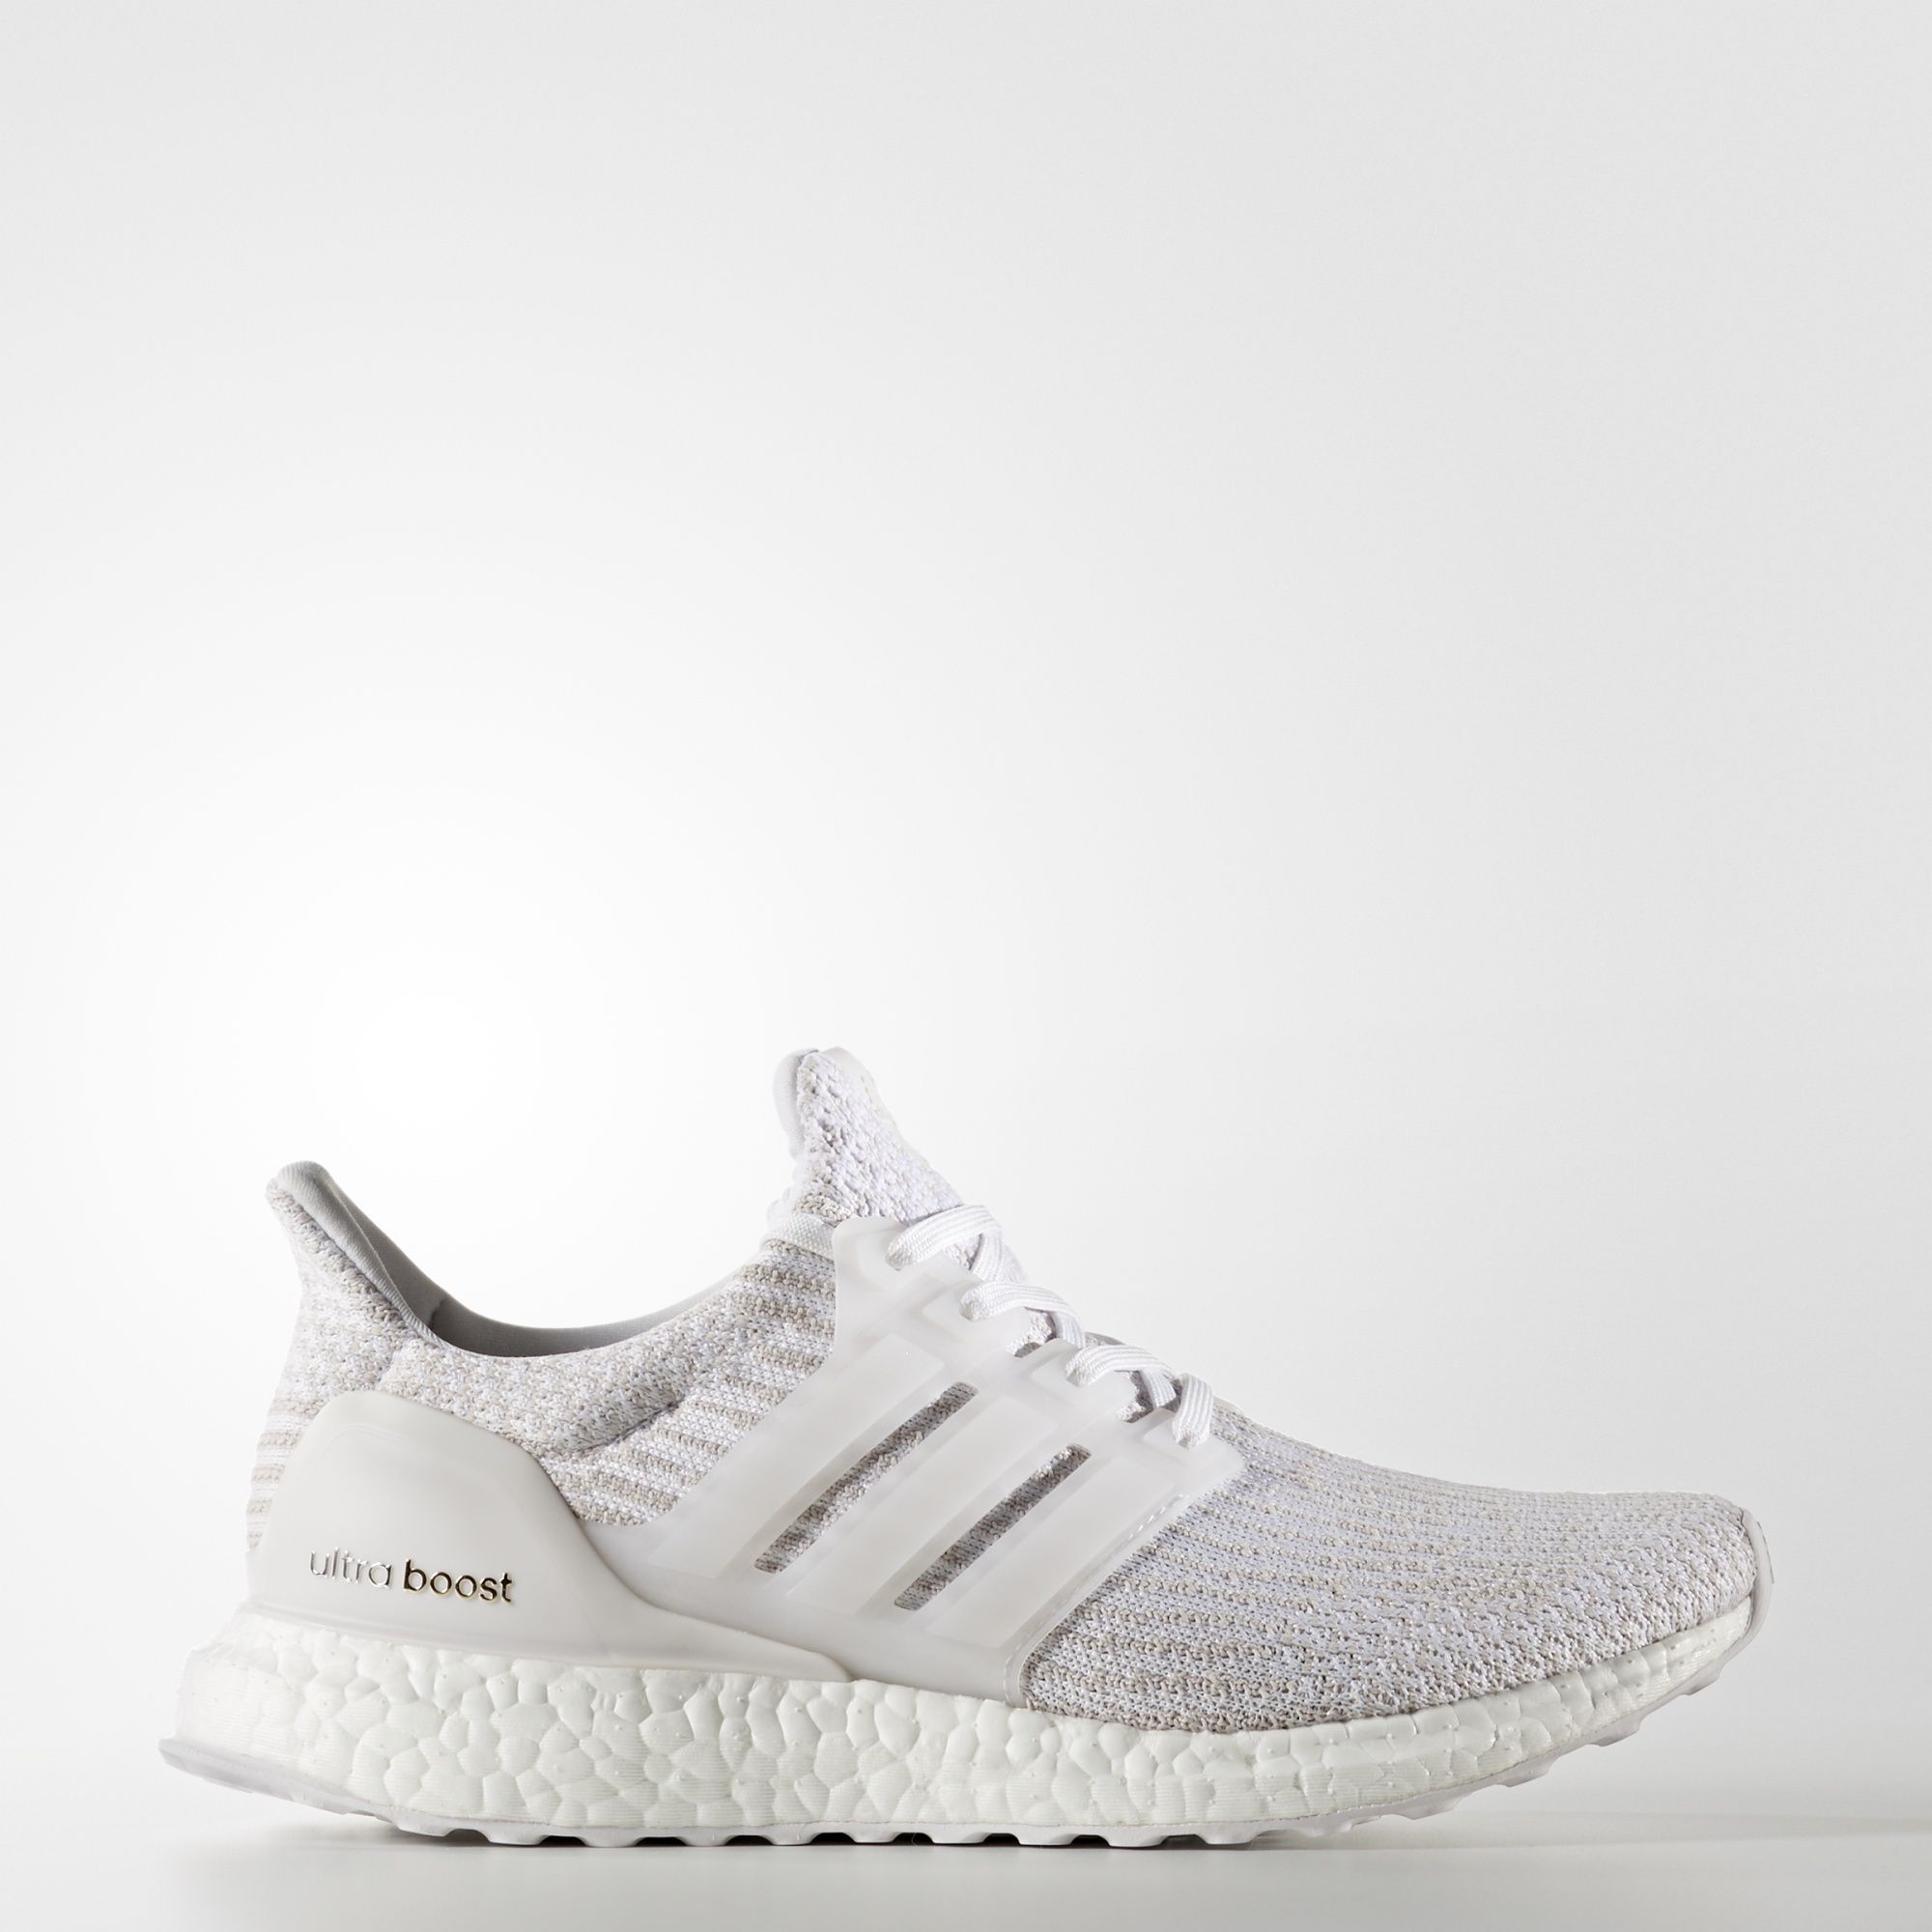 adidas-wmns-ultra-boost-3-0-white-pearl-grey-2